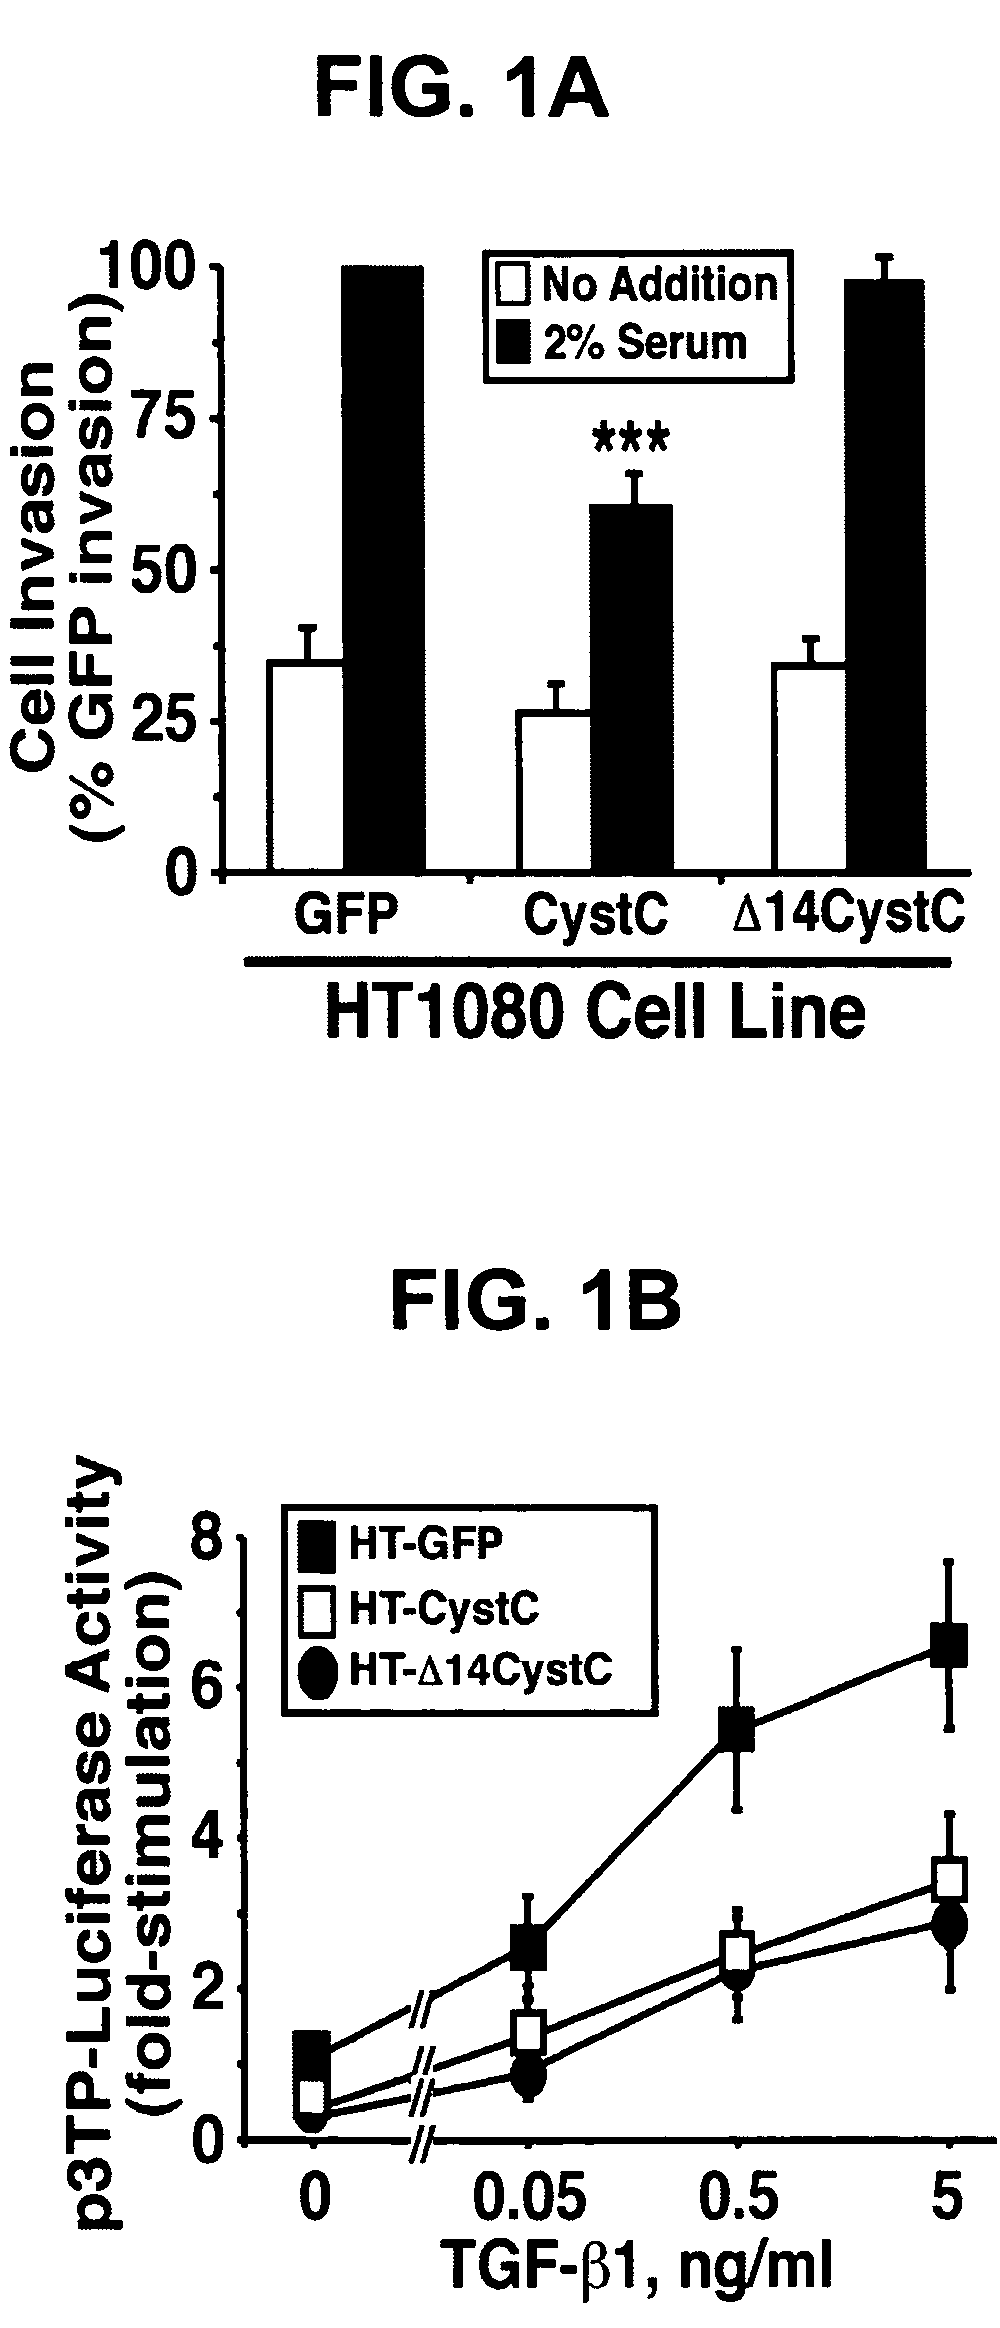 Cystatin C as an antagonist of TGF-beta and methods related thereto